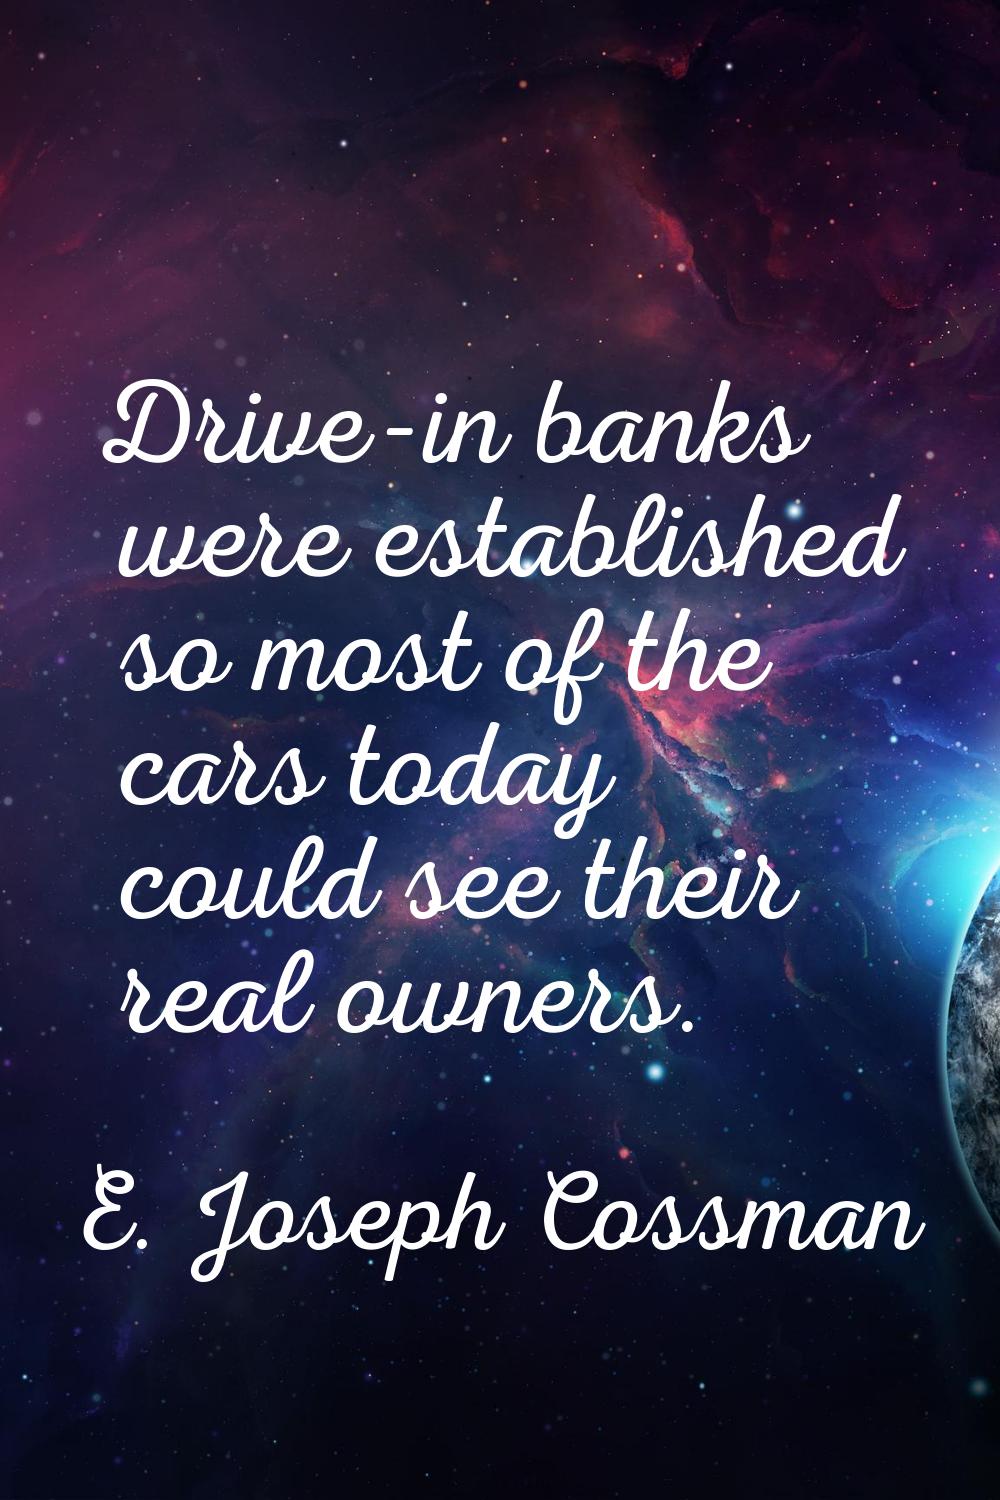 Drive-in banks were established so most of the cars today could see their real owners.